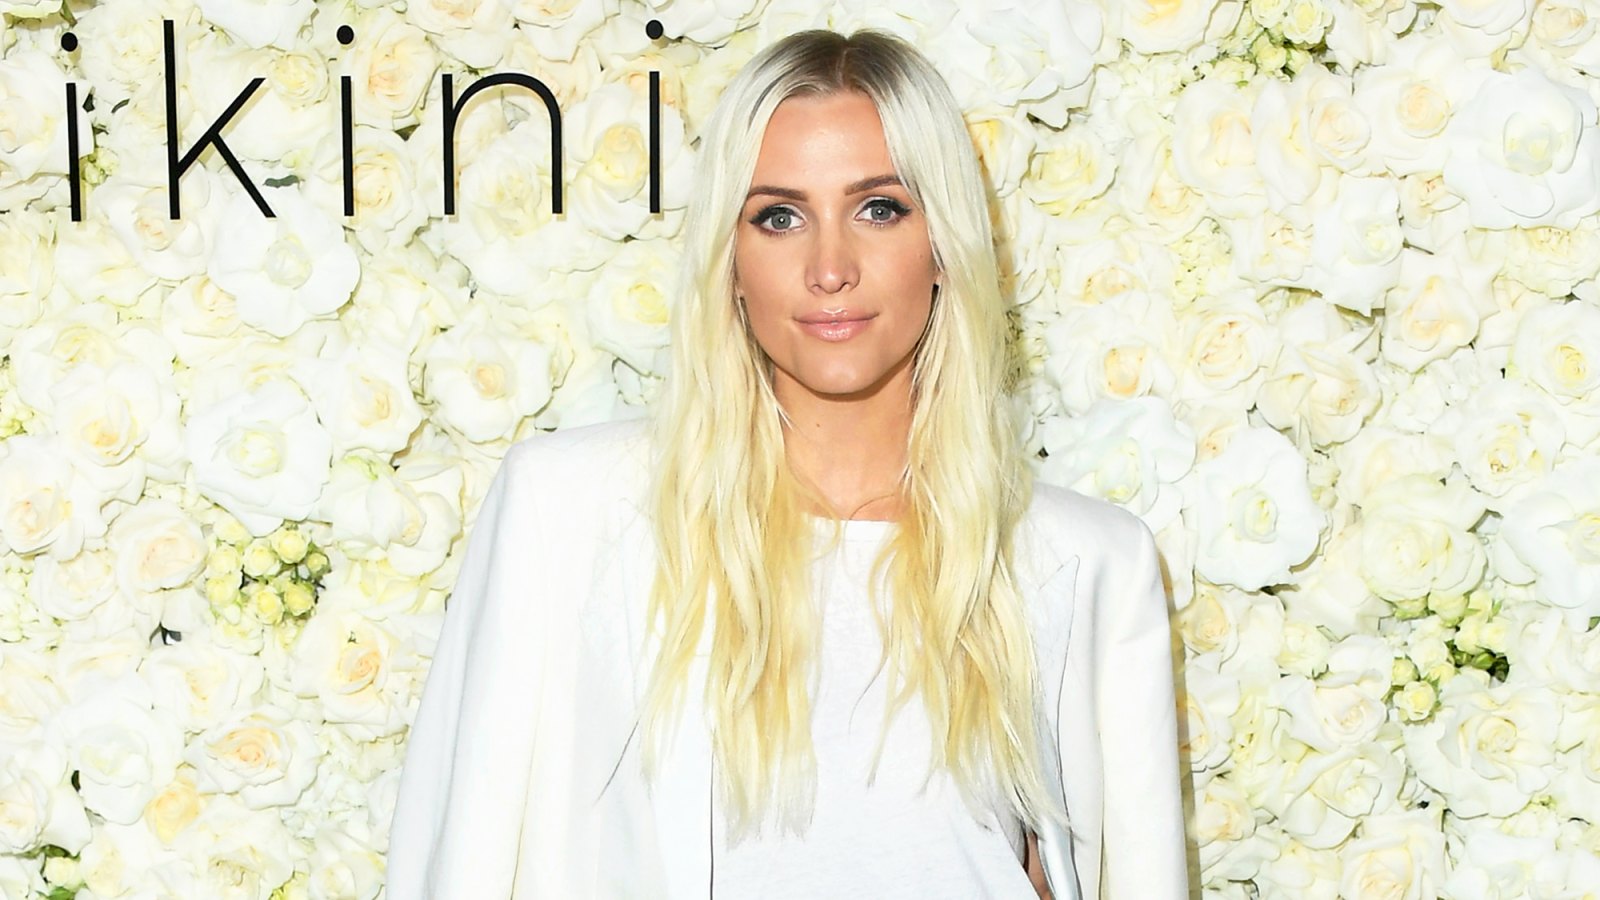 Ashlee Simpson attends the Gigi C Bikinis pop-up launch event at The Park at The Grove in Los Angeles on May 17, 2018.